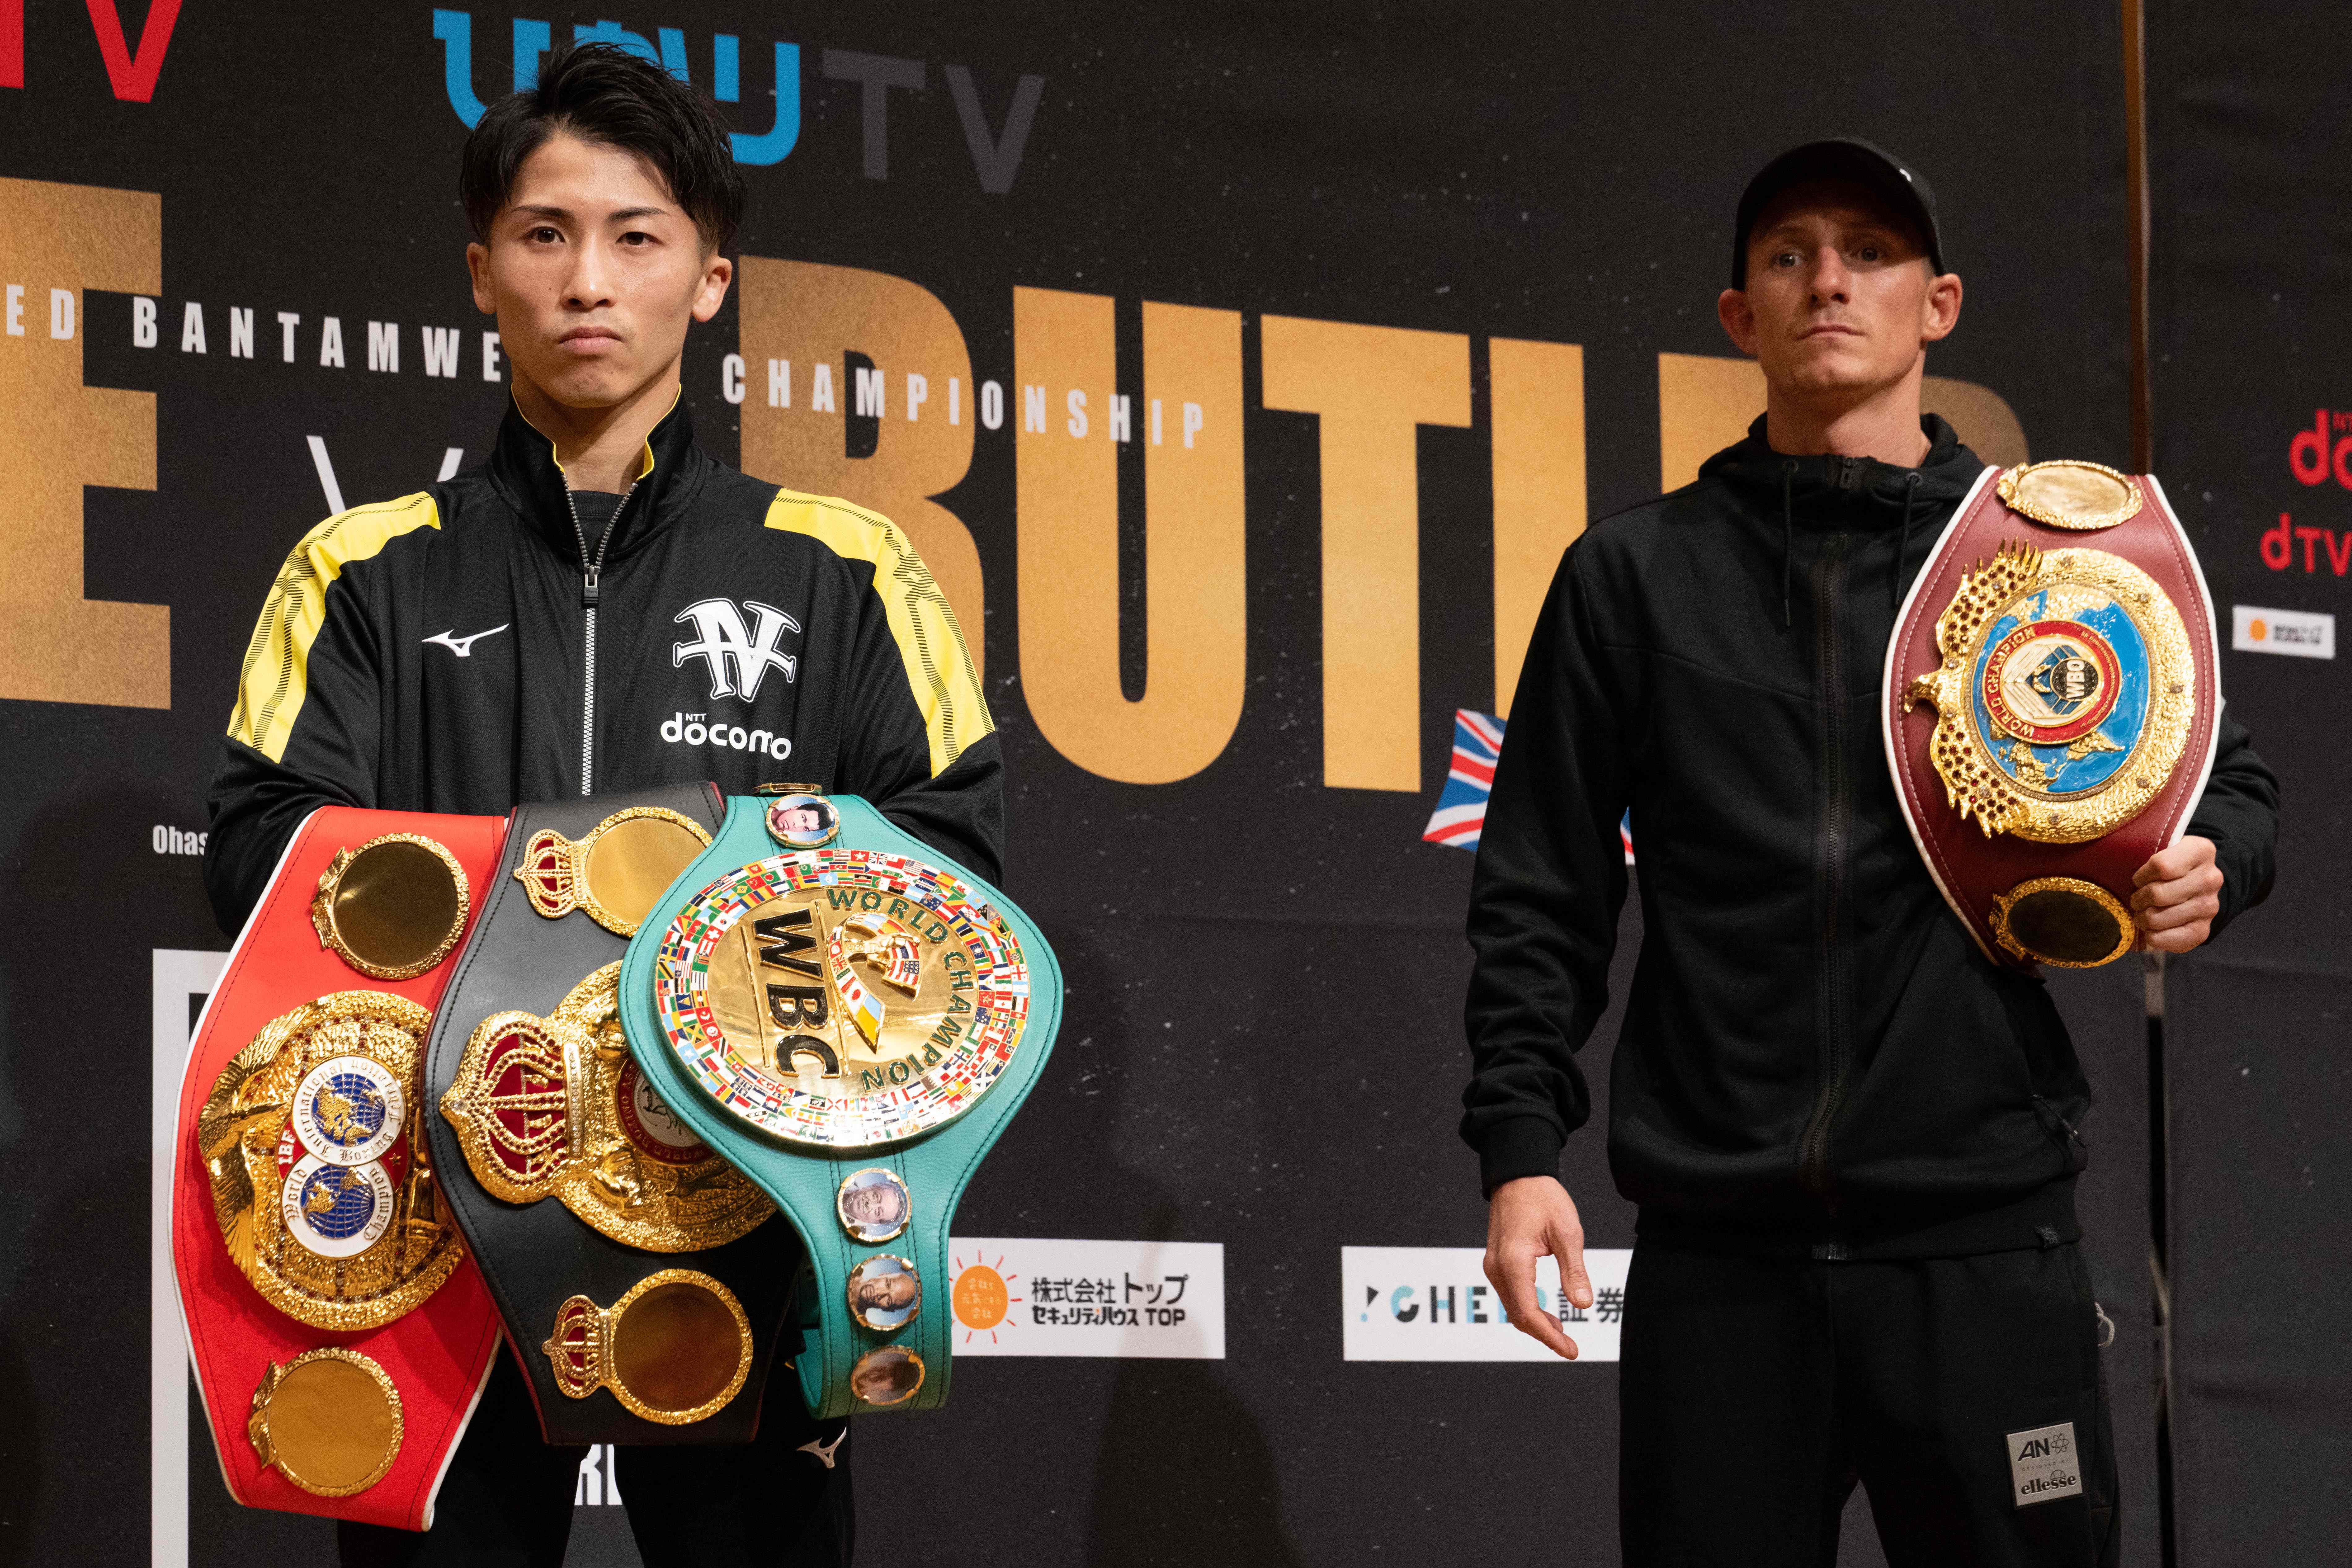 Naoya Inoue faces Paul Butler for the undisputed bantamweight championship on Tuesday in Tokyo